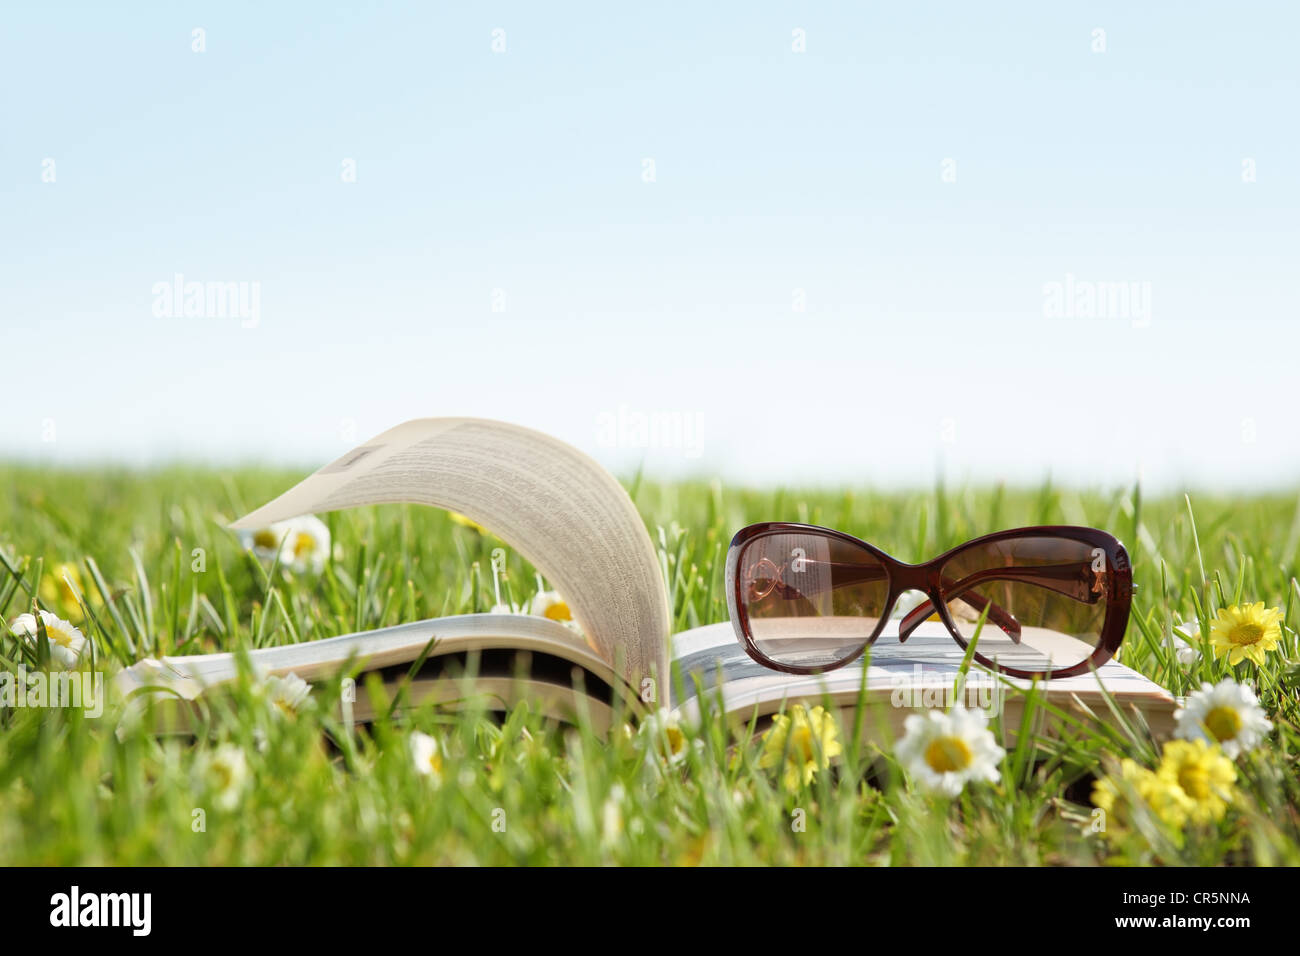 Glasses on a book outside with green grass Stock Photo